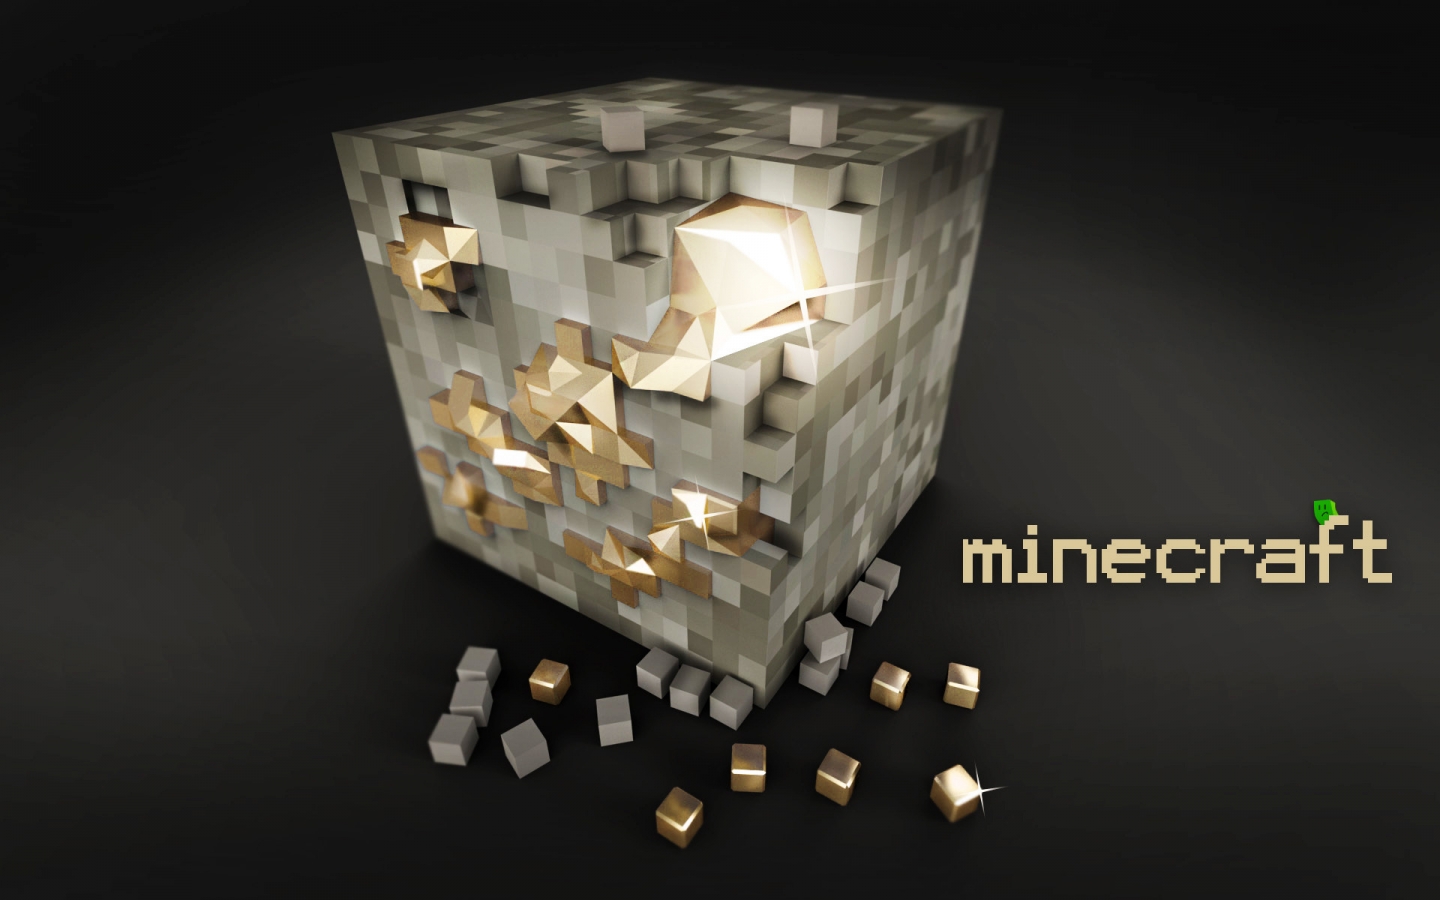 Minecraft Poster for 1440 x 900 widescreen resolution